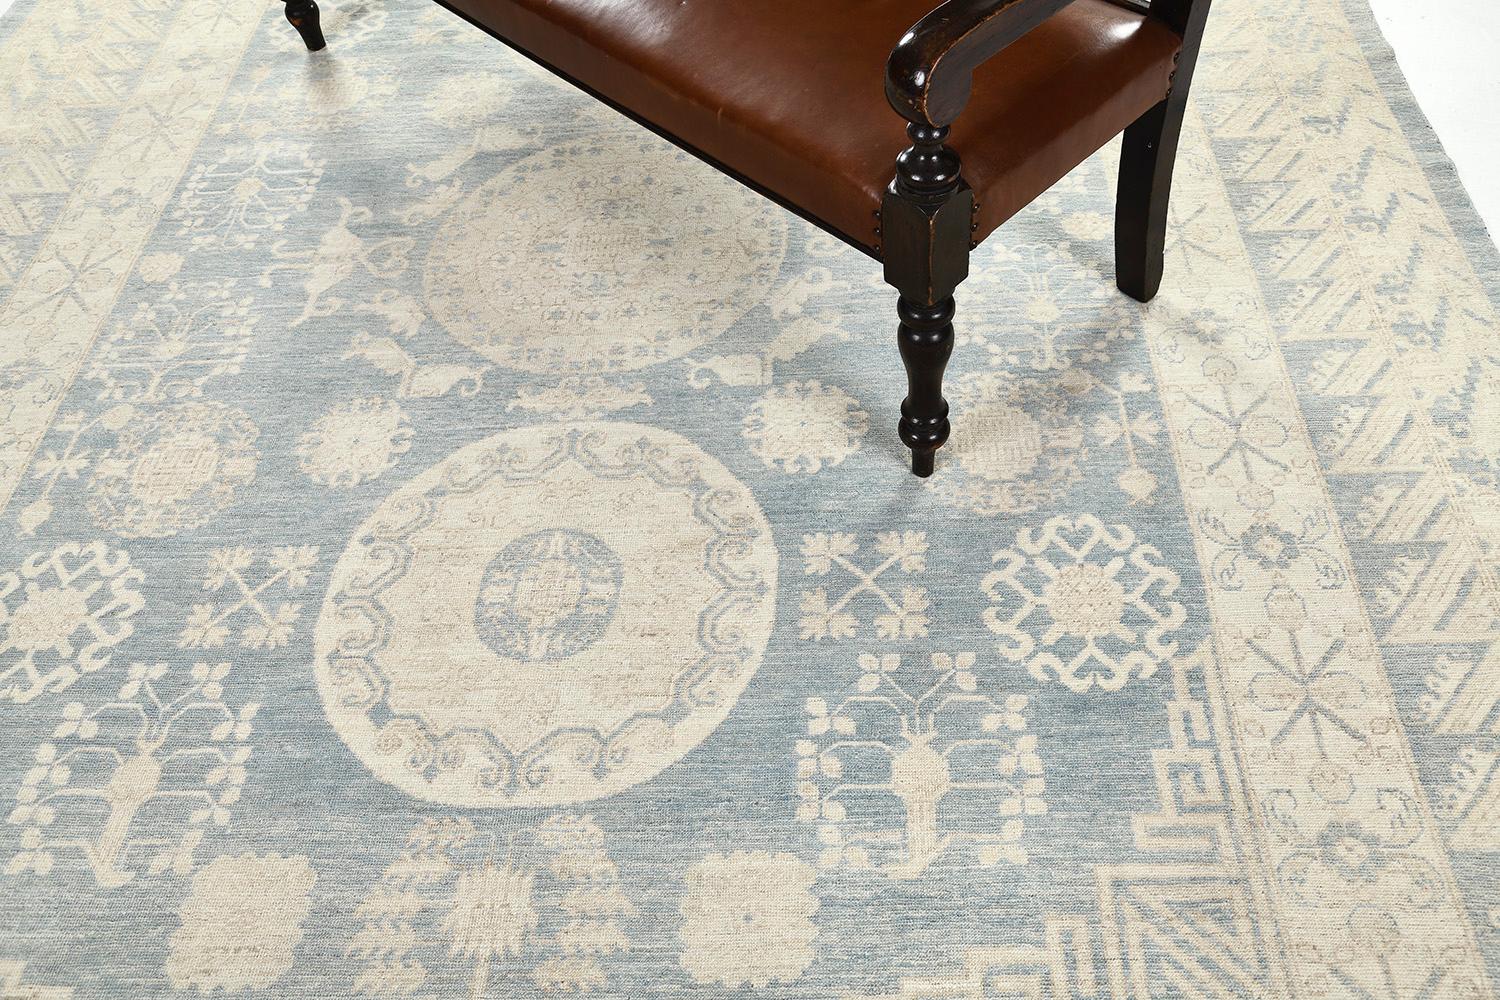 An outstanding pile woven wool Khotan design revival from our collection has come and flexed its versatility. This rug is adaptable for any home interior decor. Stylized motifs and geometrical designs in a muted sands and sky fields manifest the